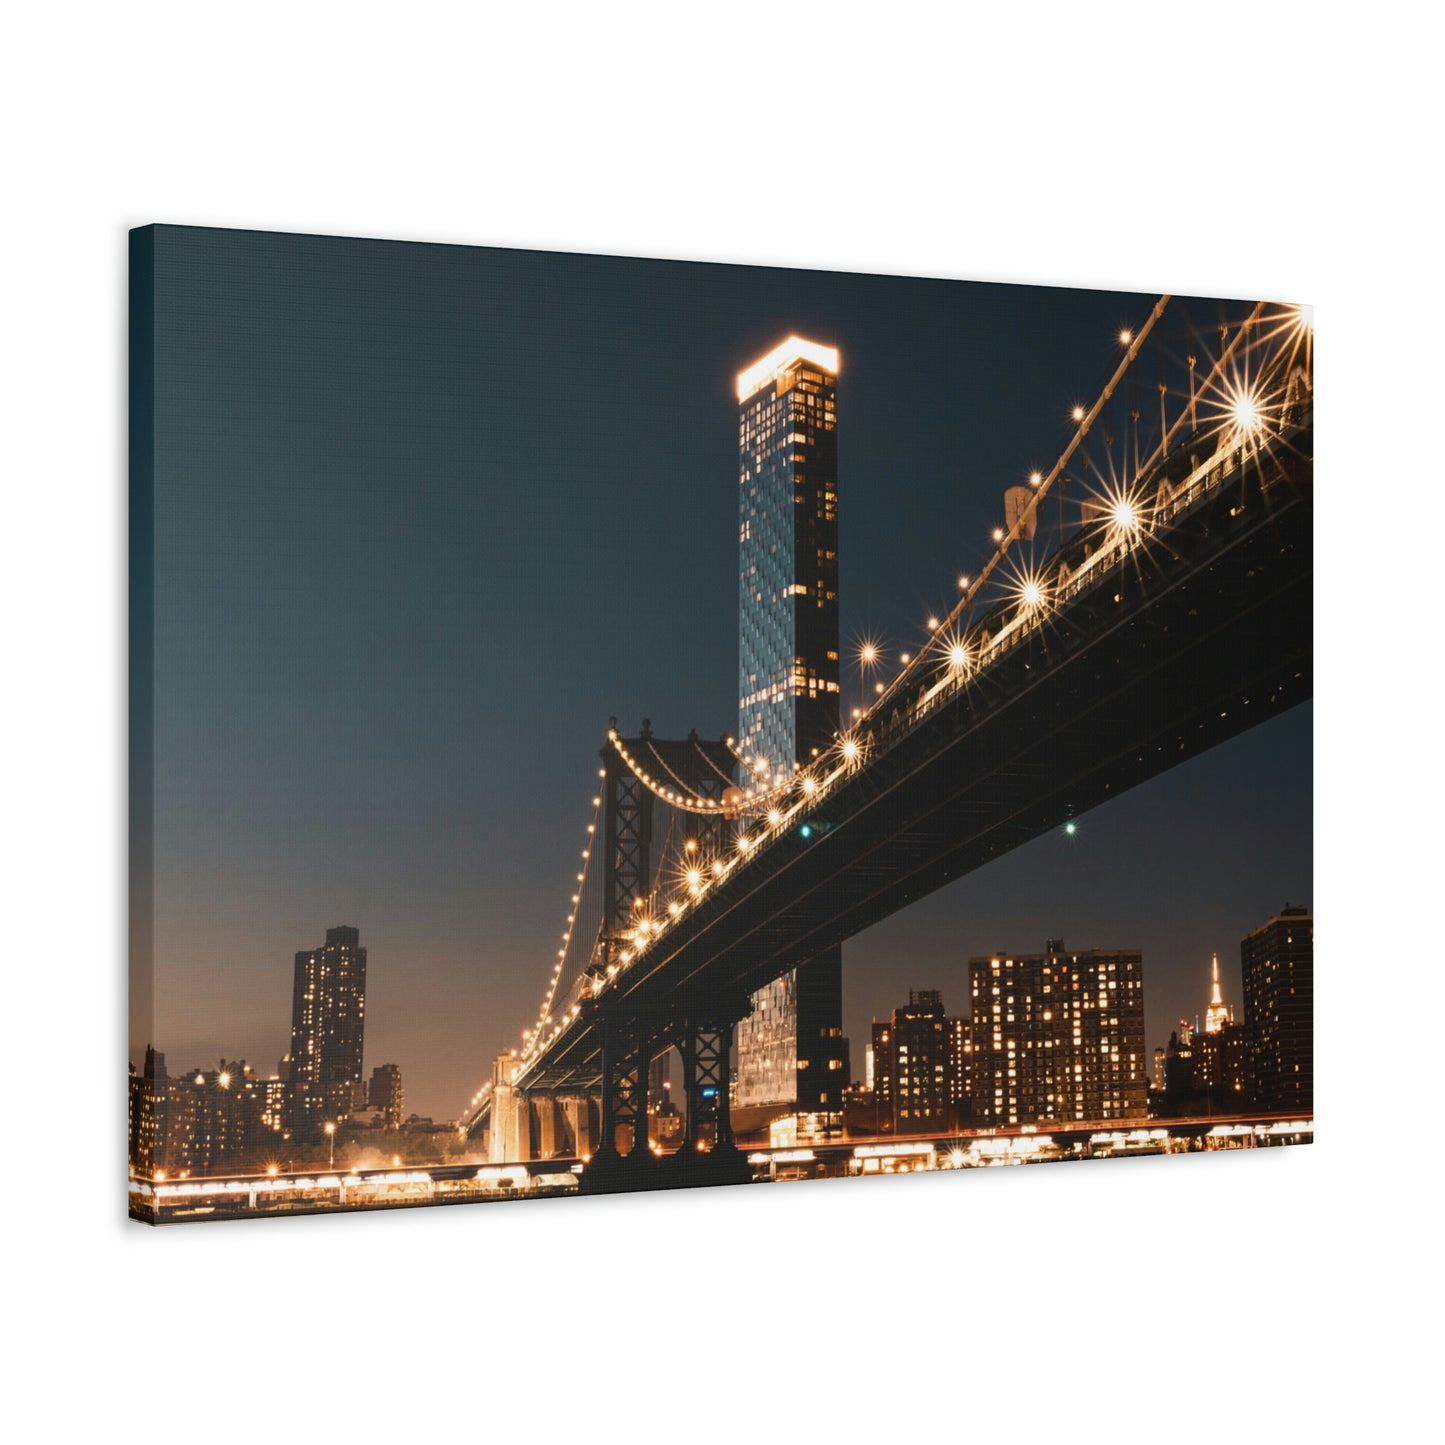 CITY LIGHTS BY SWIMORDROWN UK Satin Canvas, Stretched